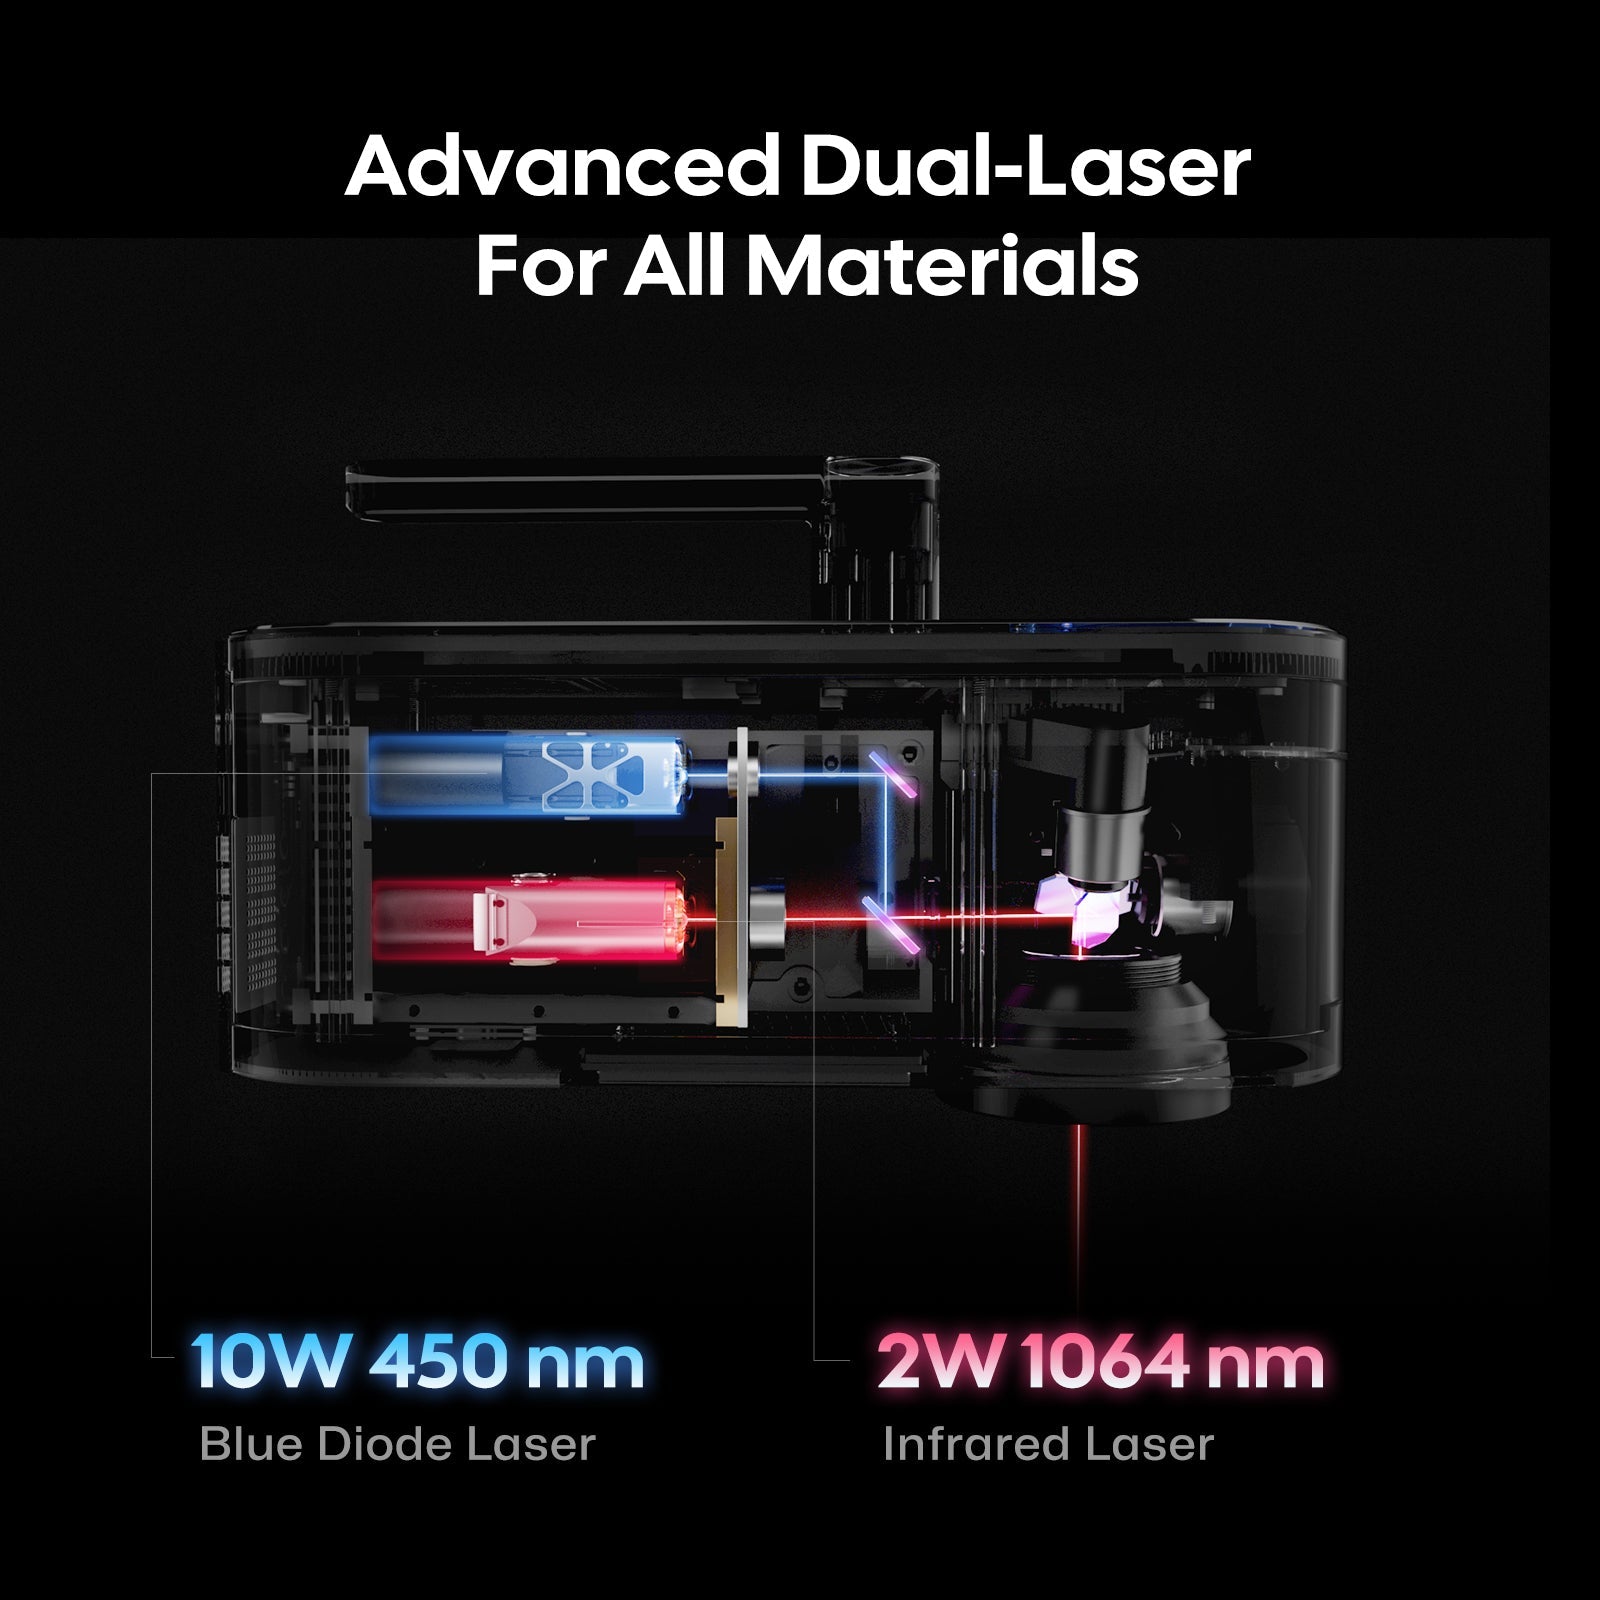 Advanced Dual-laser system combines 10W 450nm blue laser and 2W 1064nm infrared laser.